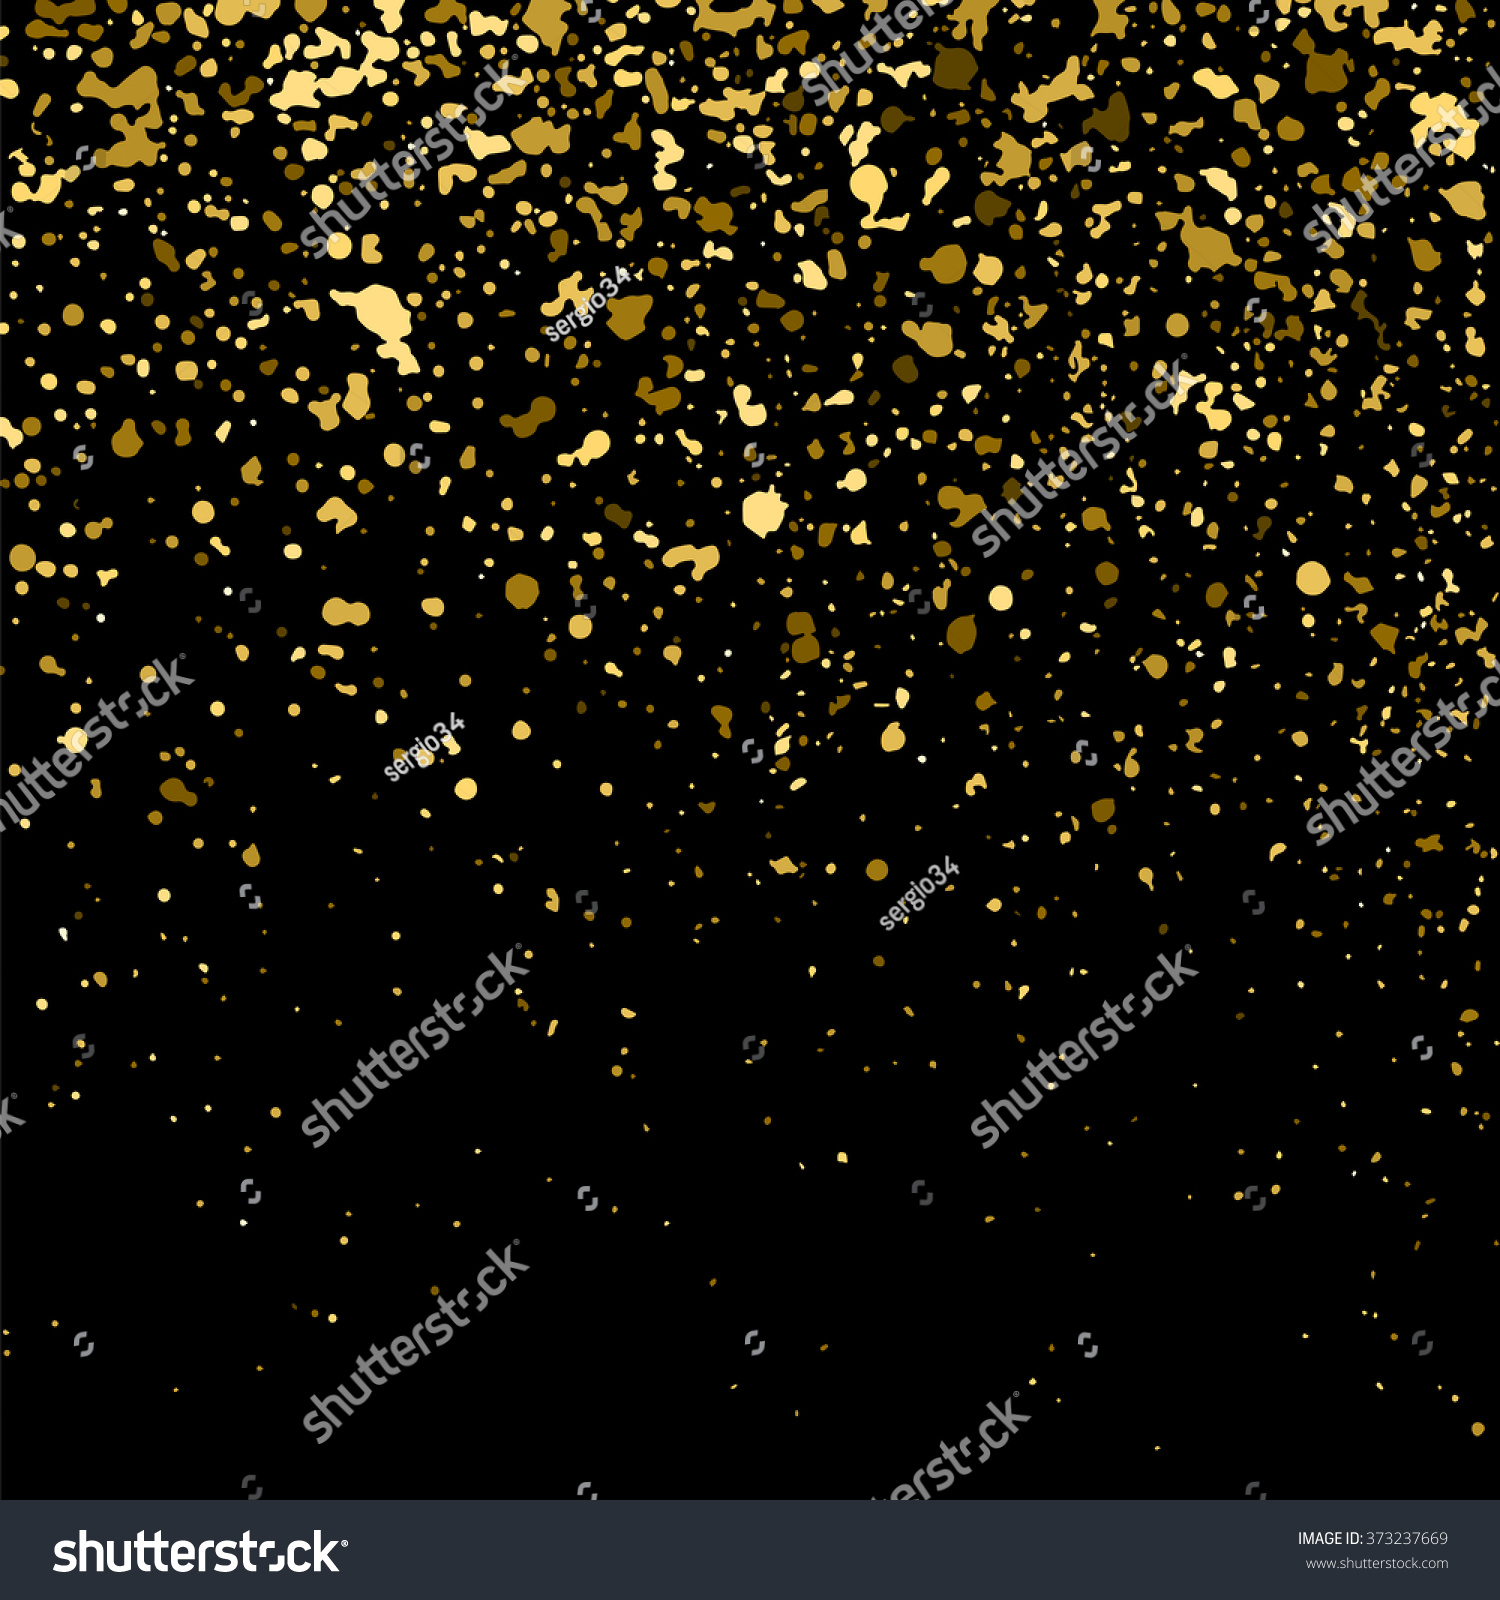 Gold Glitter Texture On Black Background Stock Vector (Royalty Free